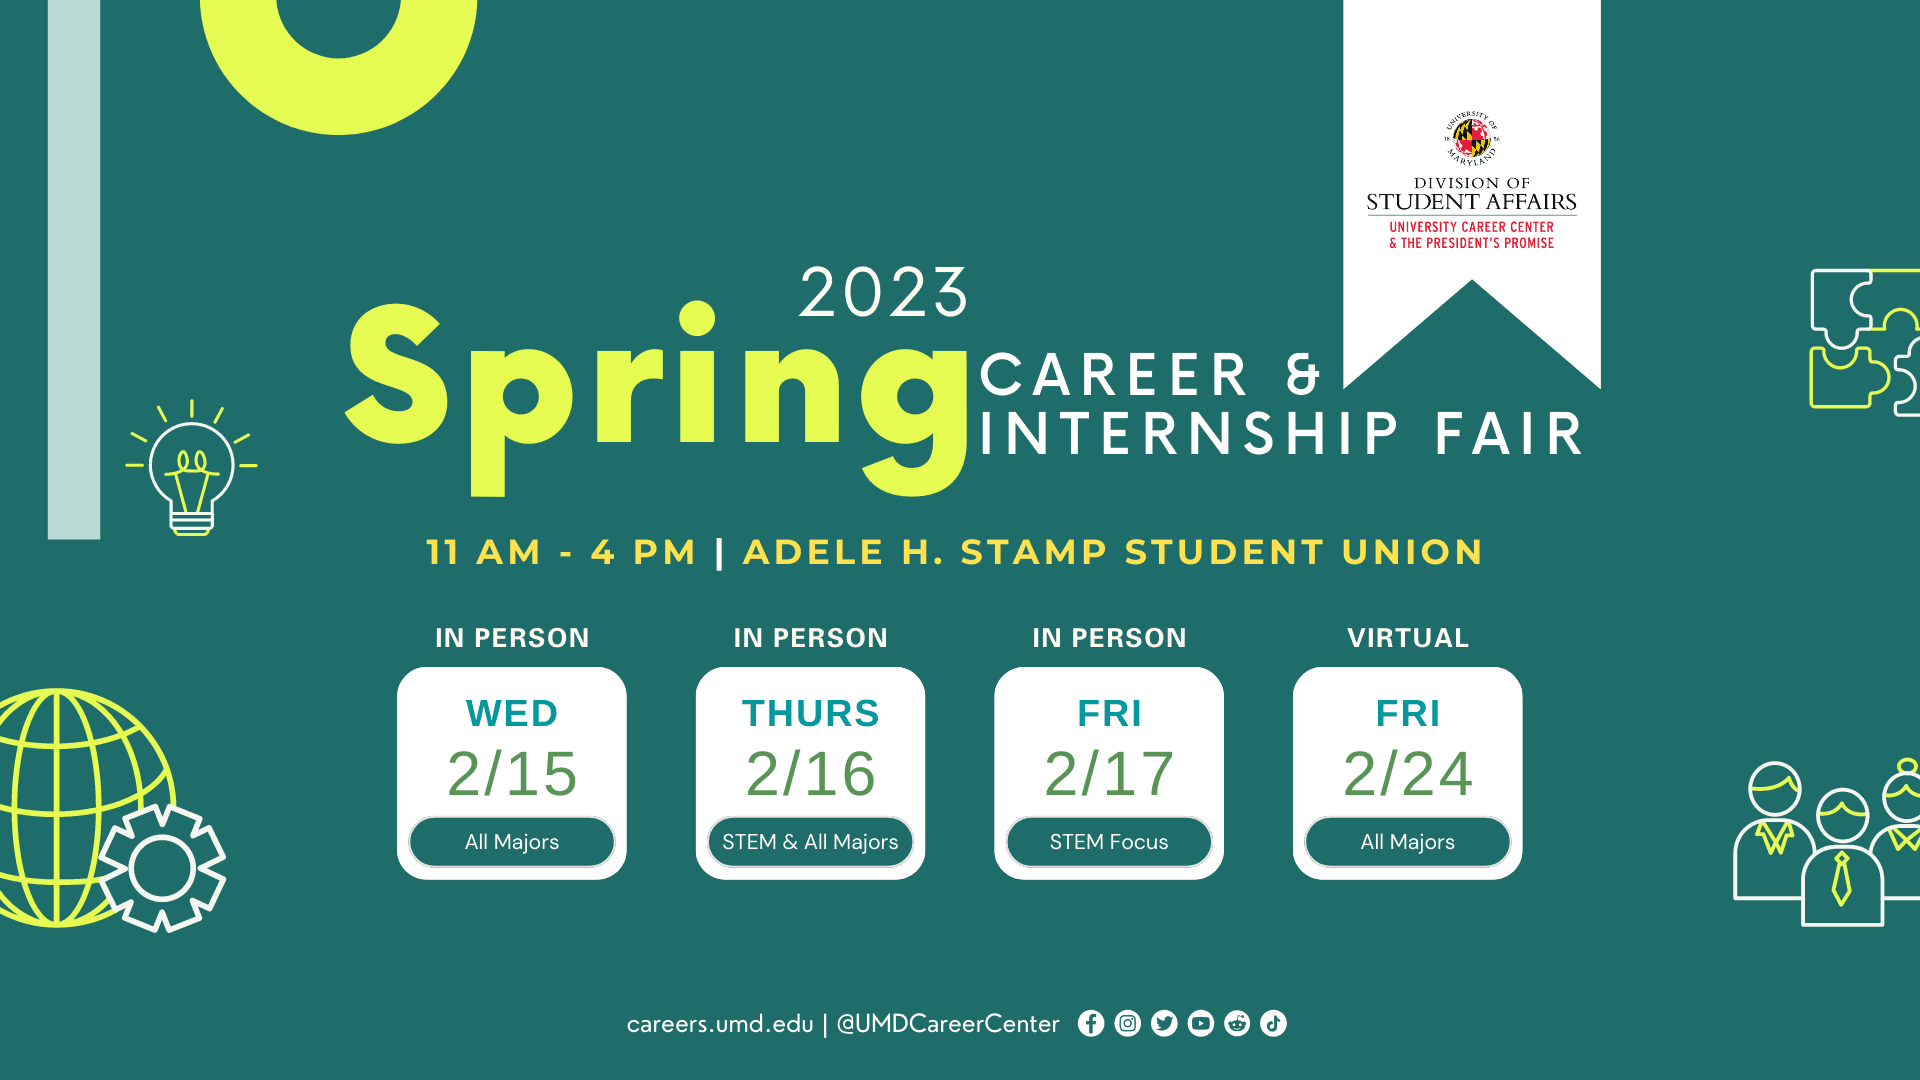 A promotional image for the 2023 Spring Career & Internship Fair.